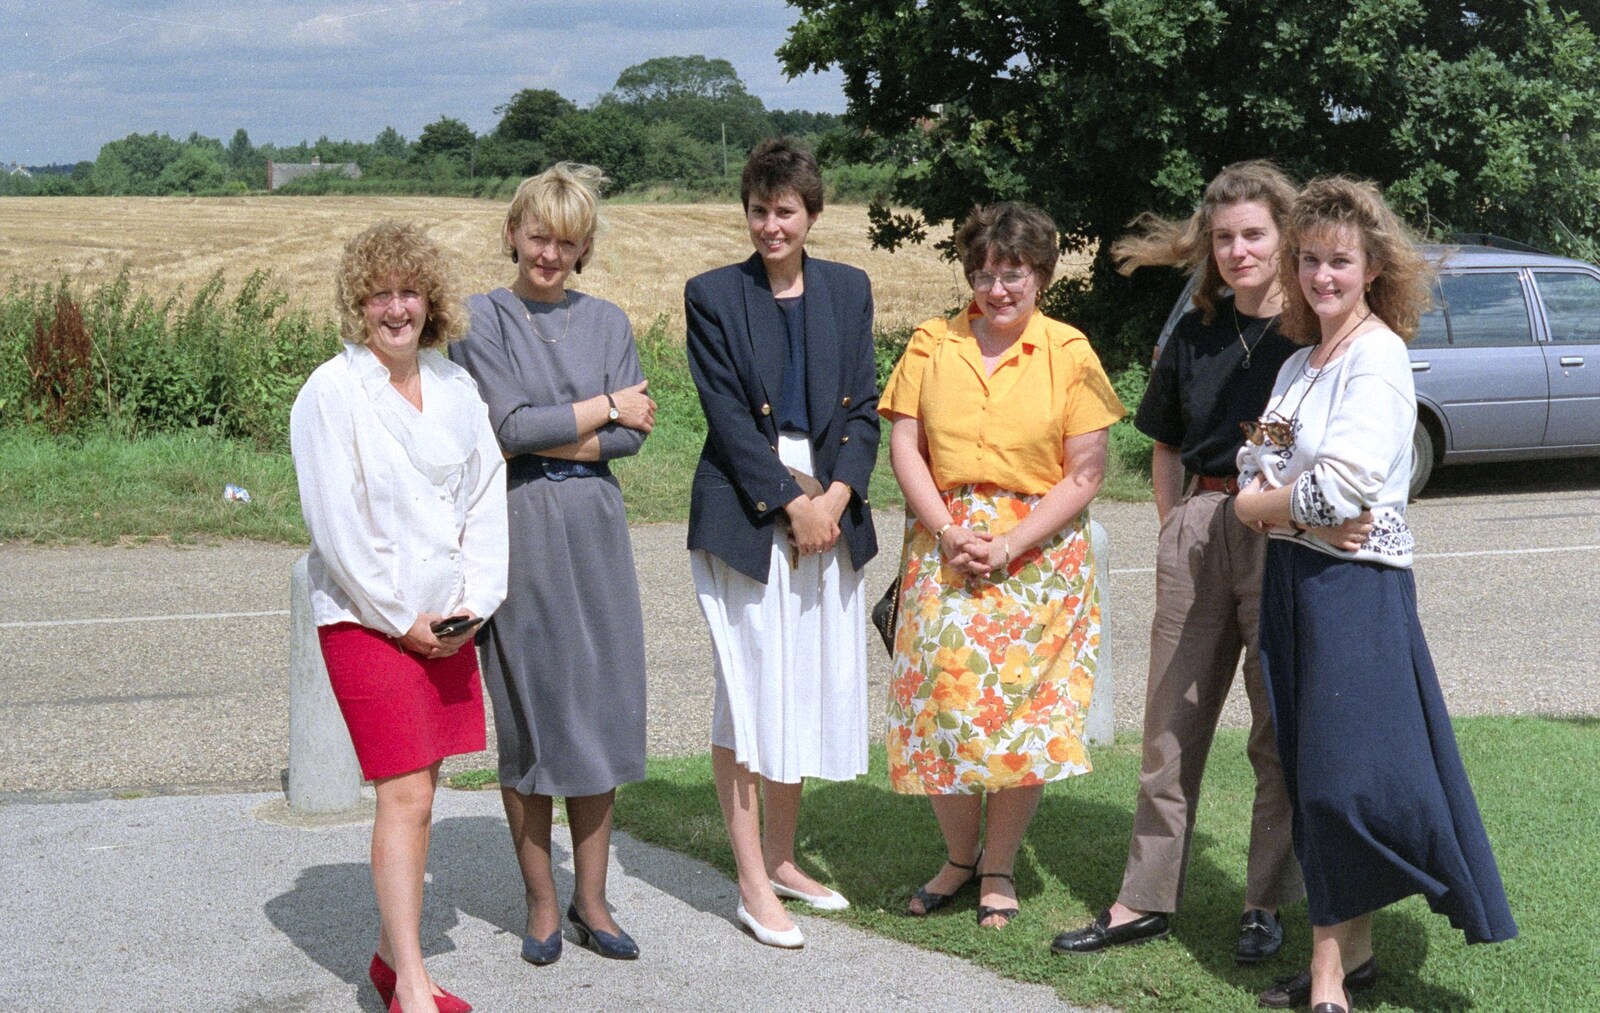 Tina, Six-foot Sue, Helen King and Becky from Nosher Leaves BPCC Business Magazines, Colchester, Essex - 18th July 1991